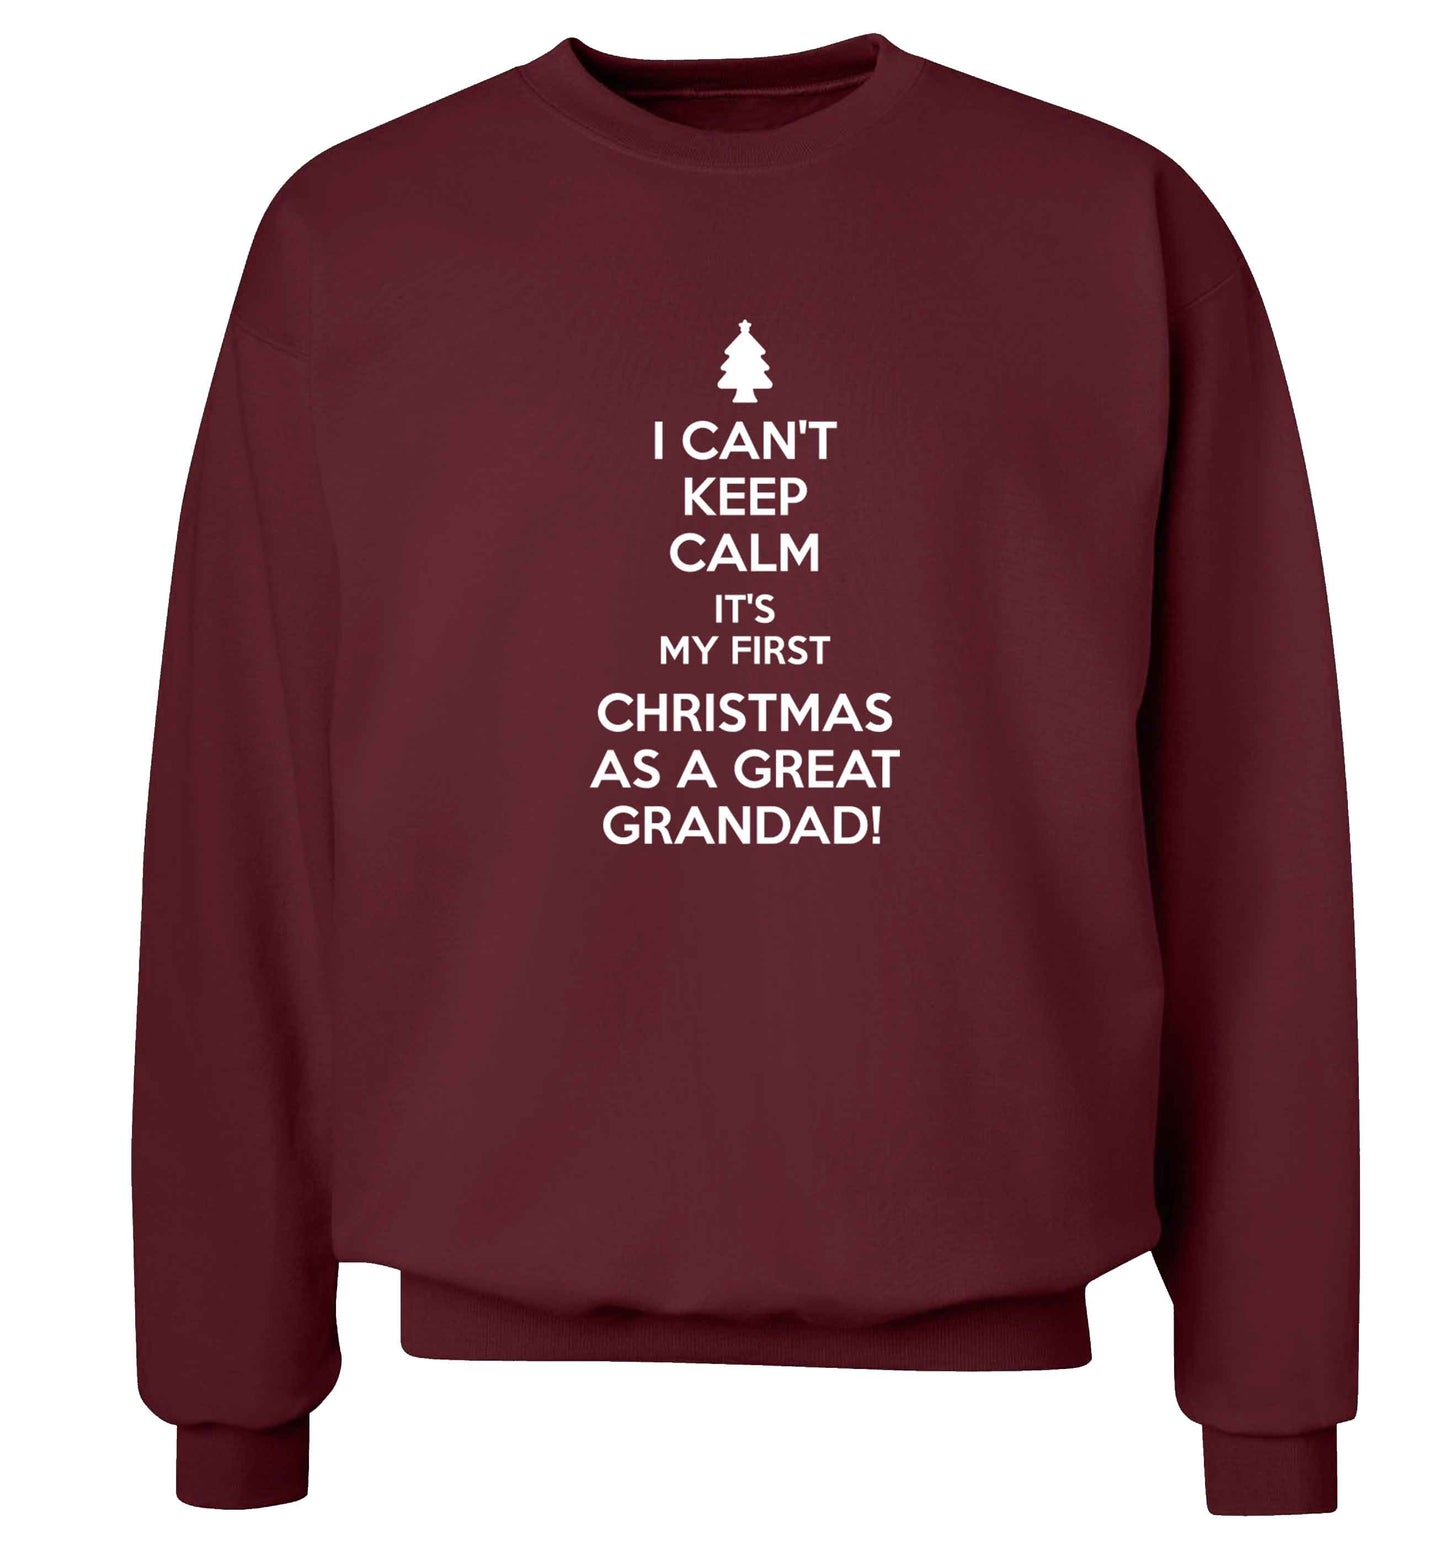 I can't keep calm it's my first Christmas as a great grandad! Adult's unisex maroon Sweater 2XL